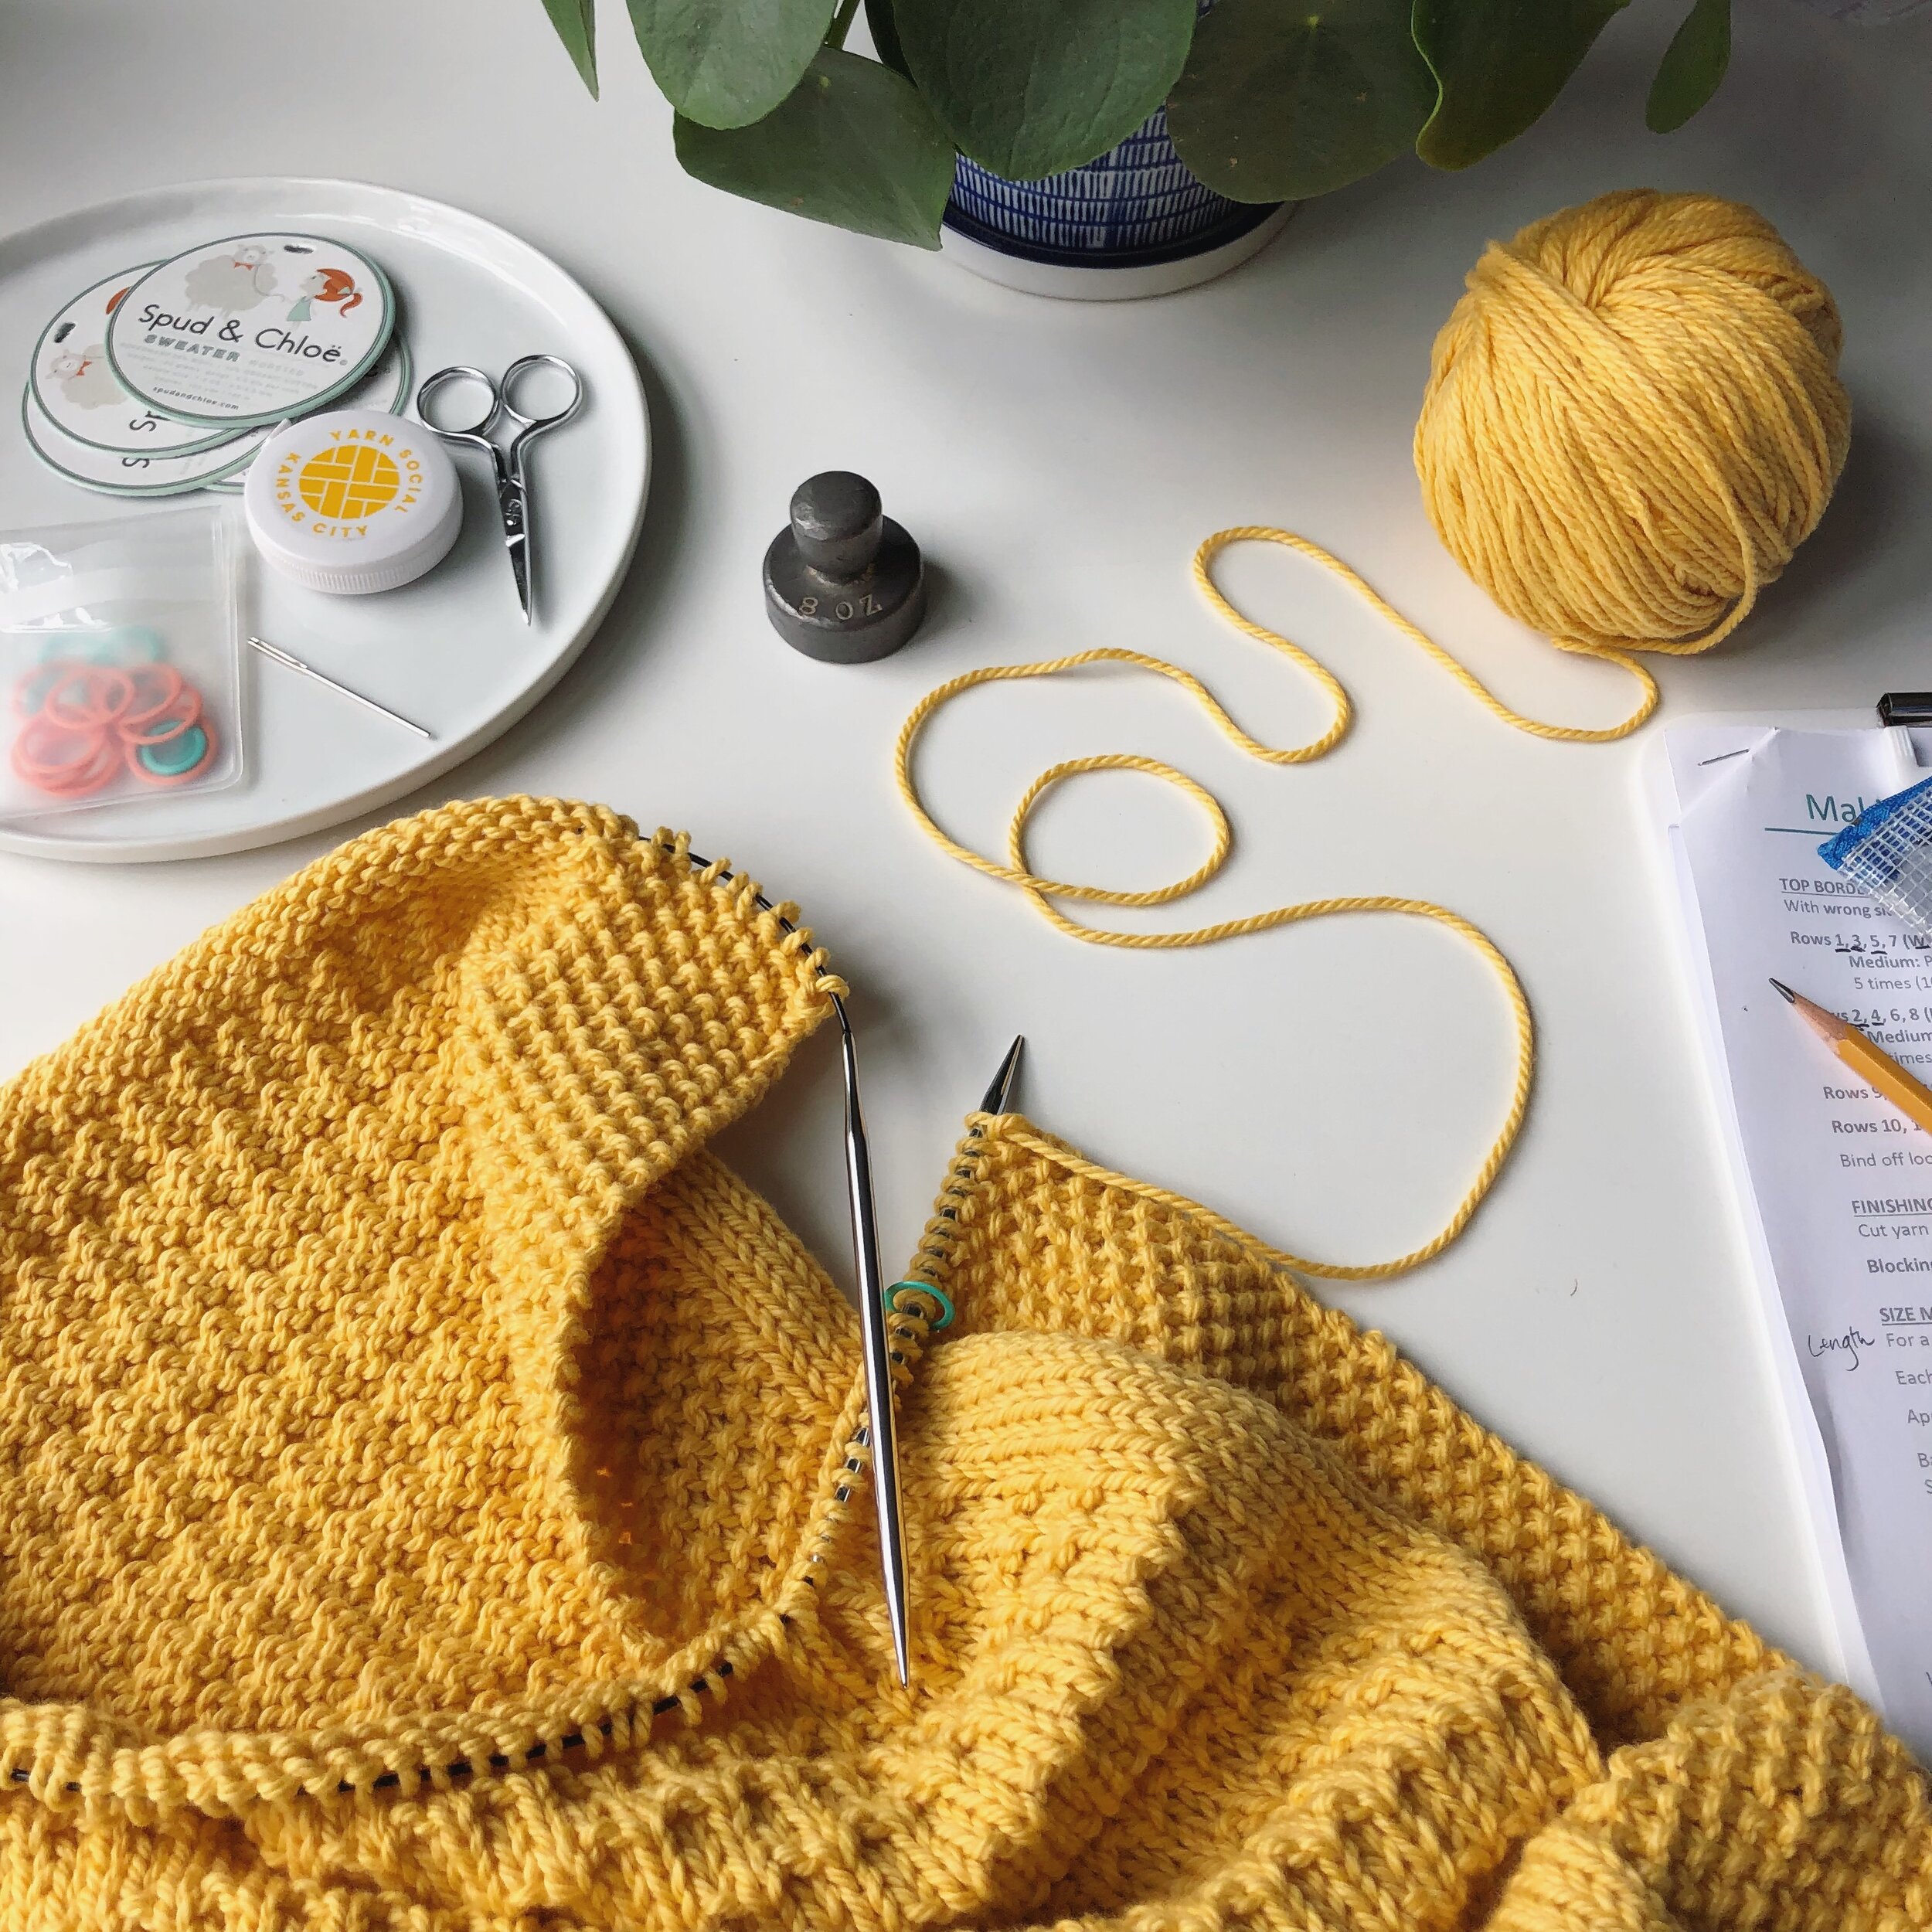 Use a pair of circular knitting needles to create round knit work.